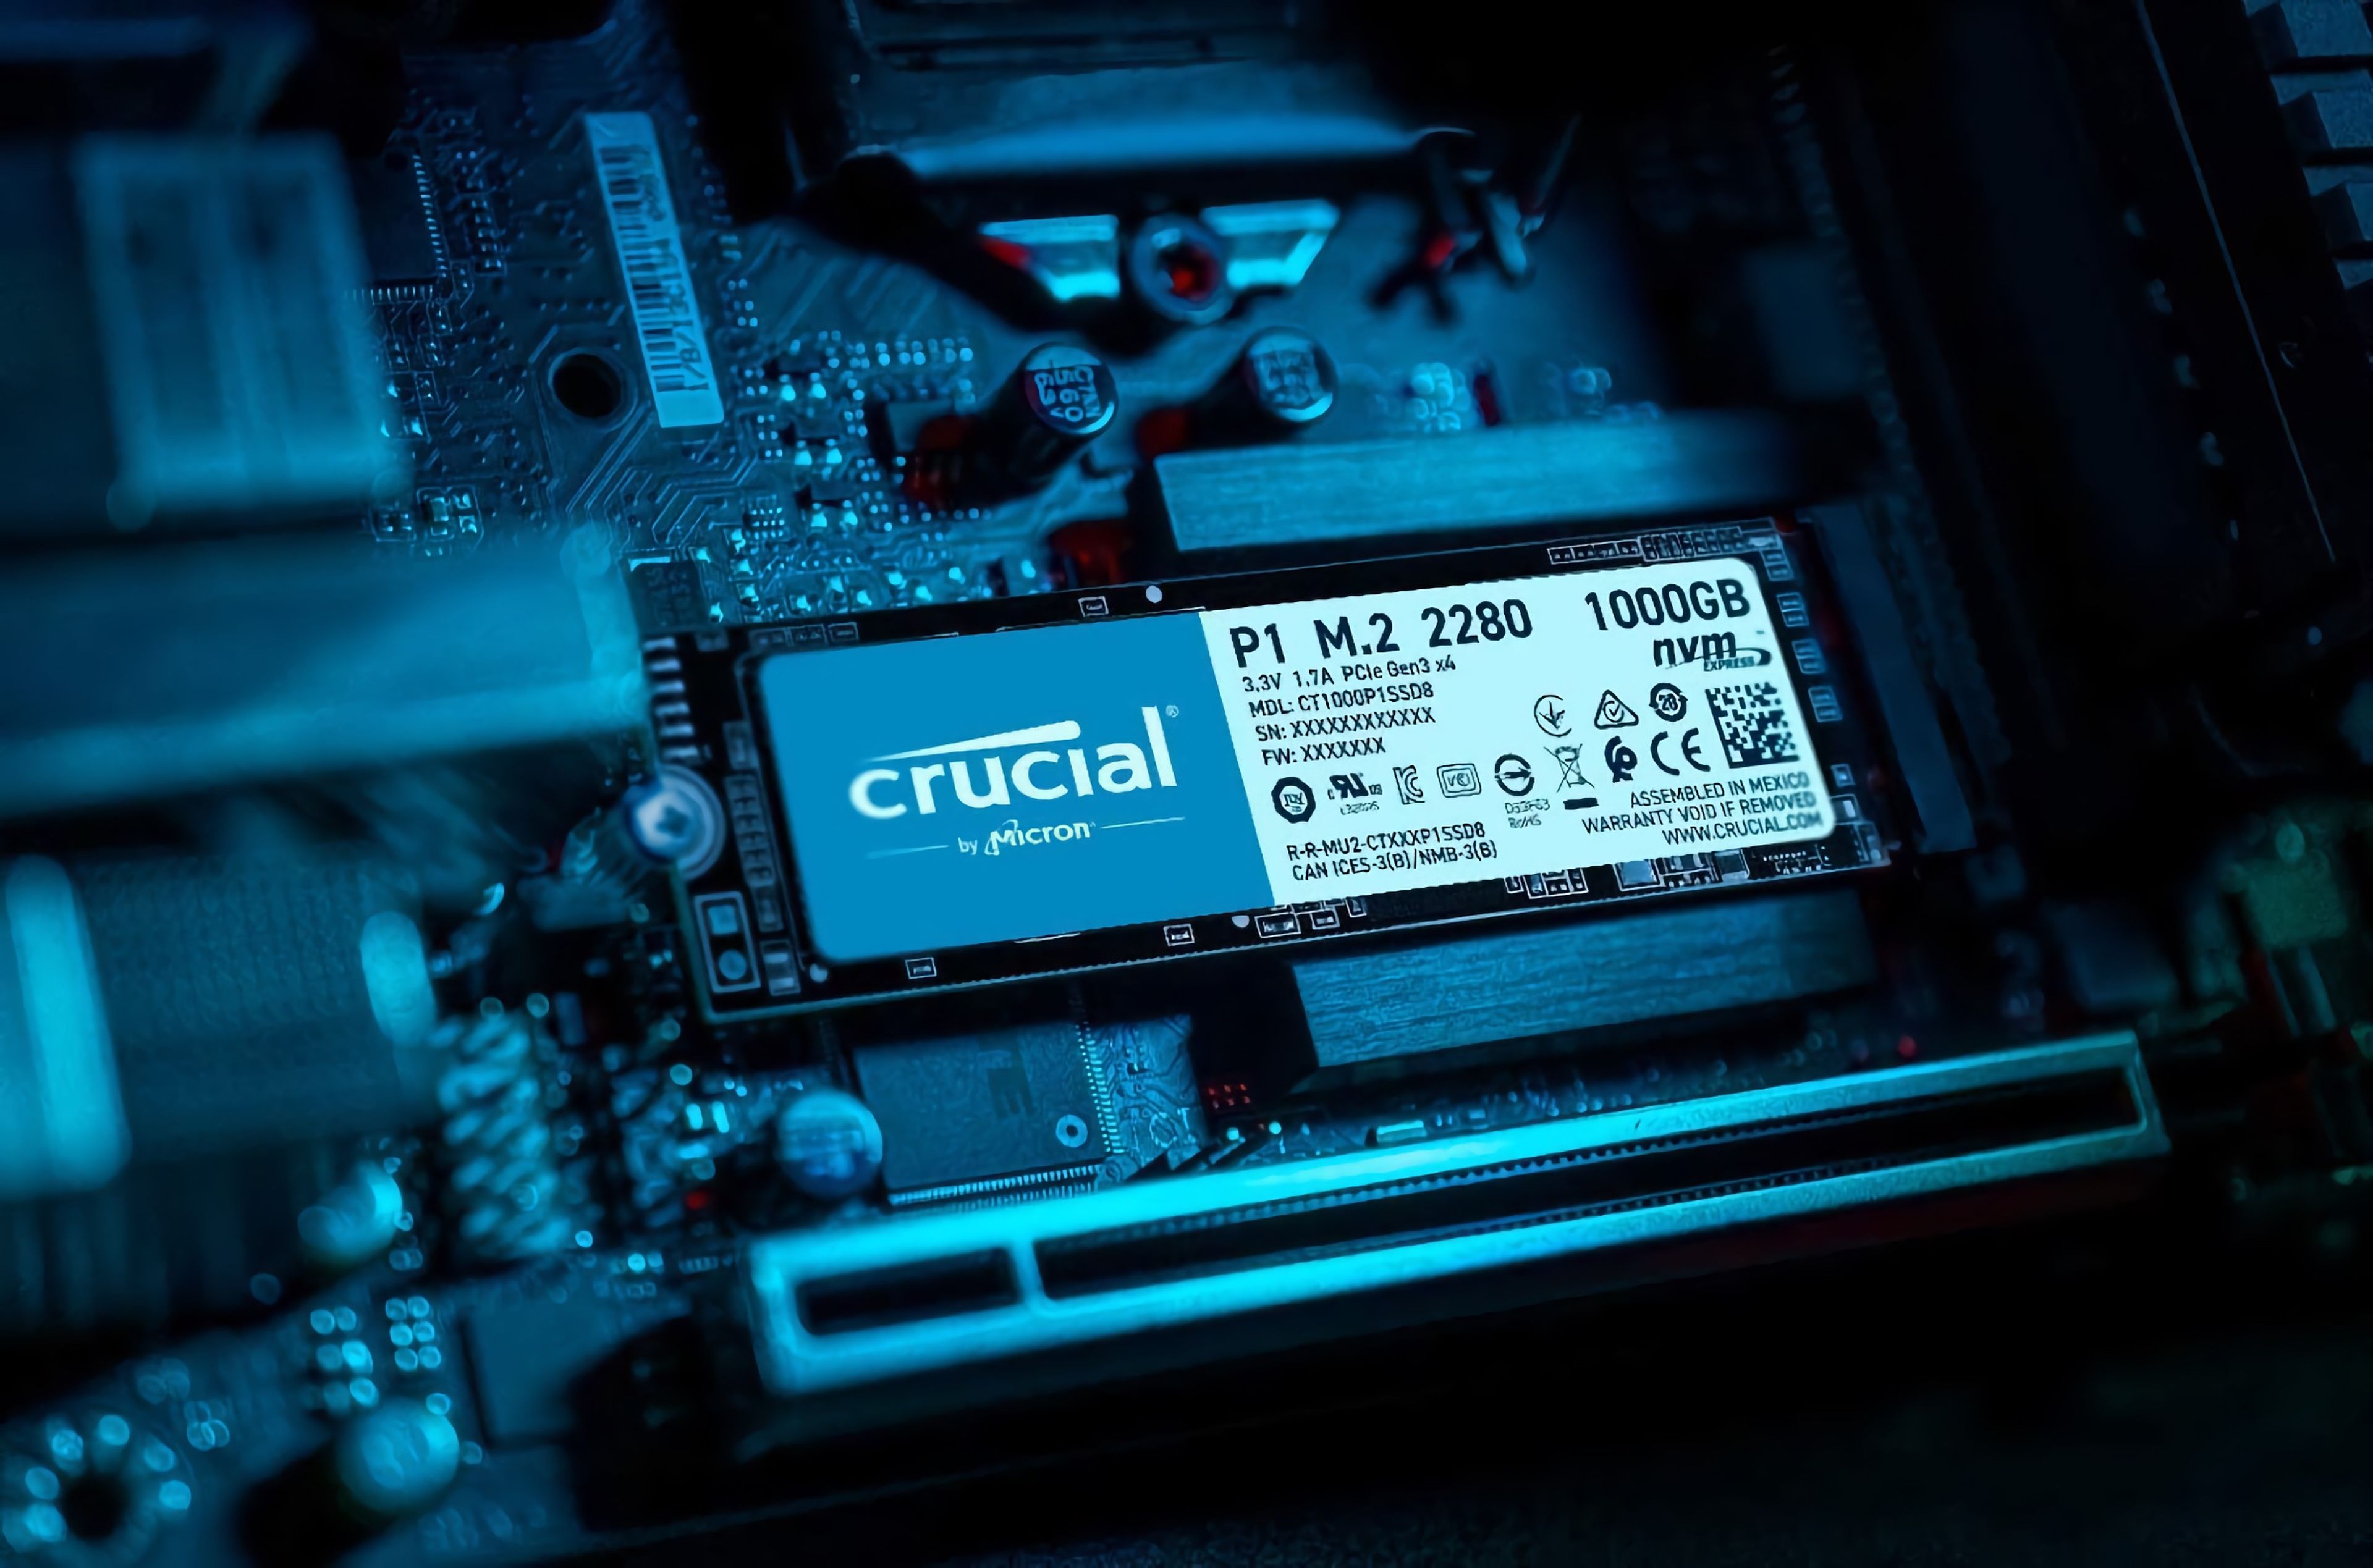 Crucial P1 SSD NVMe